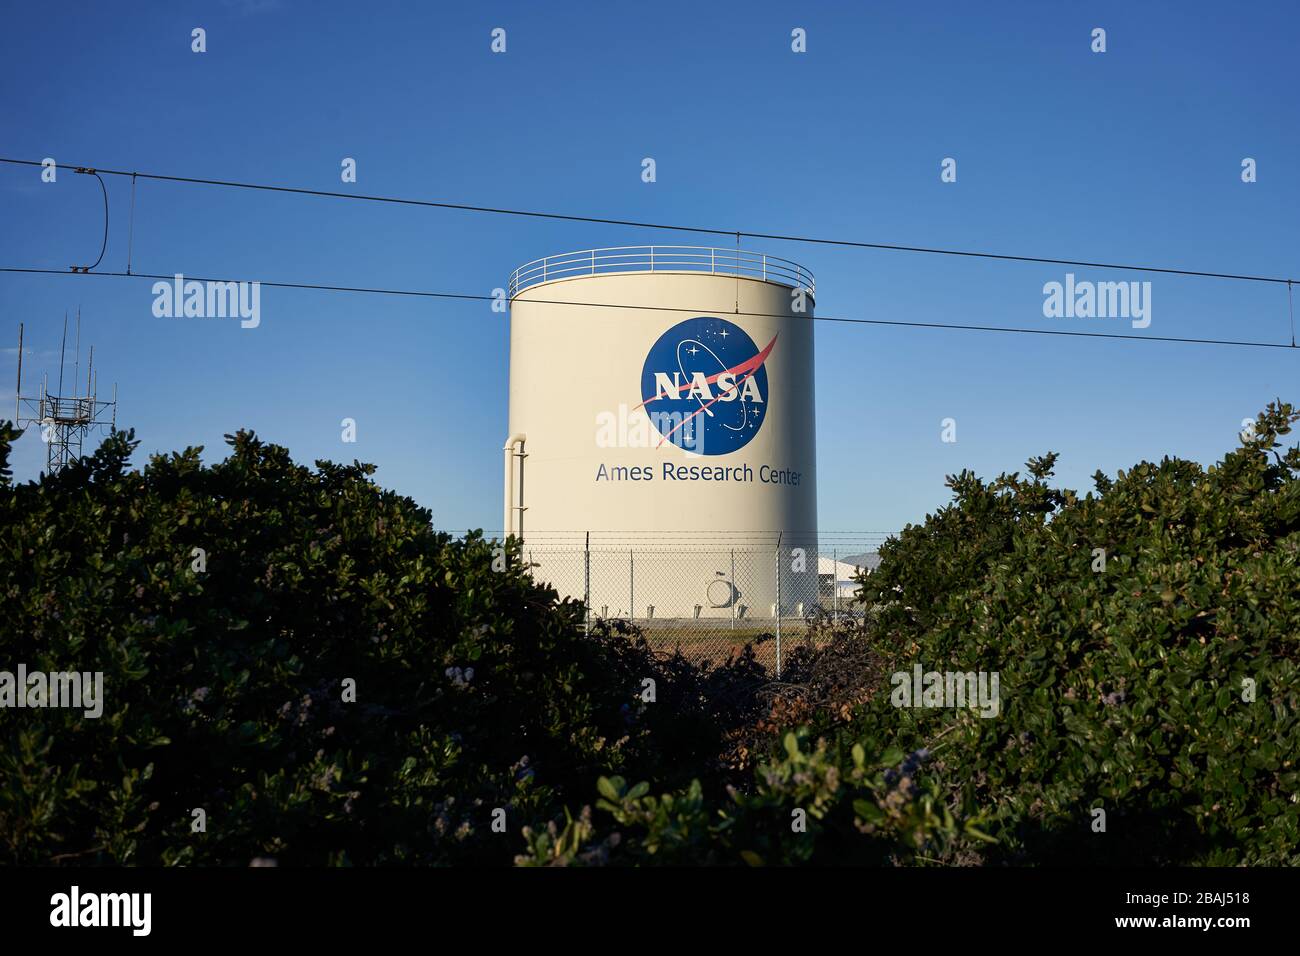 The NASA Ames Research Center, a major NASA research center at Moffett Federal Airfield in Mountain View, California, seen on Monday, Mar 2, 2020. Stock Photo